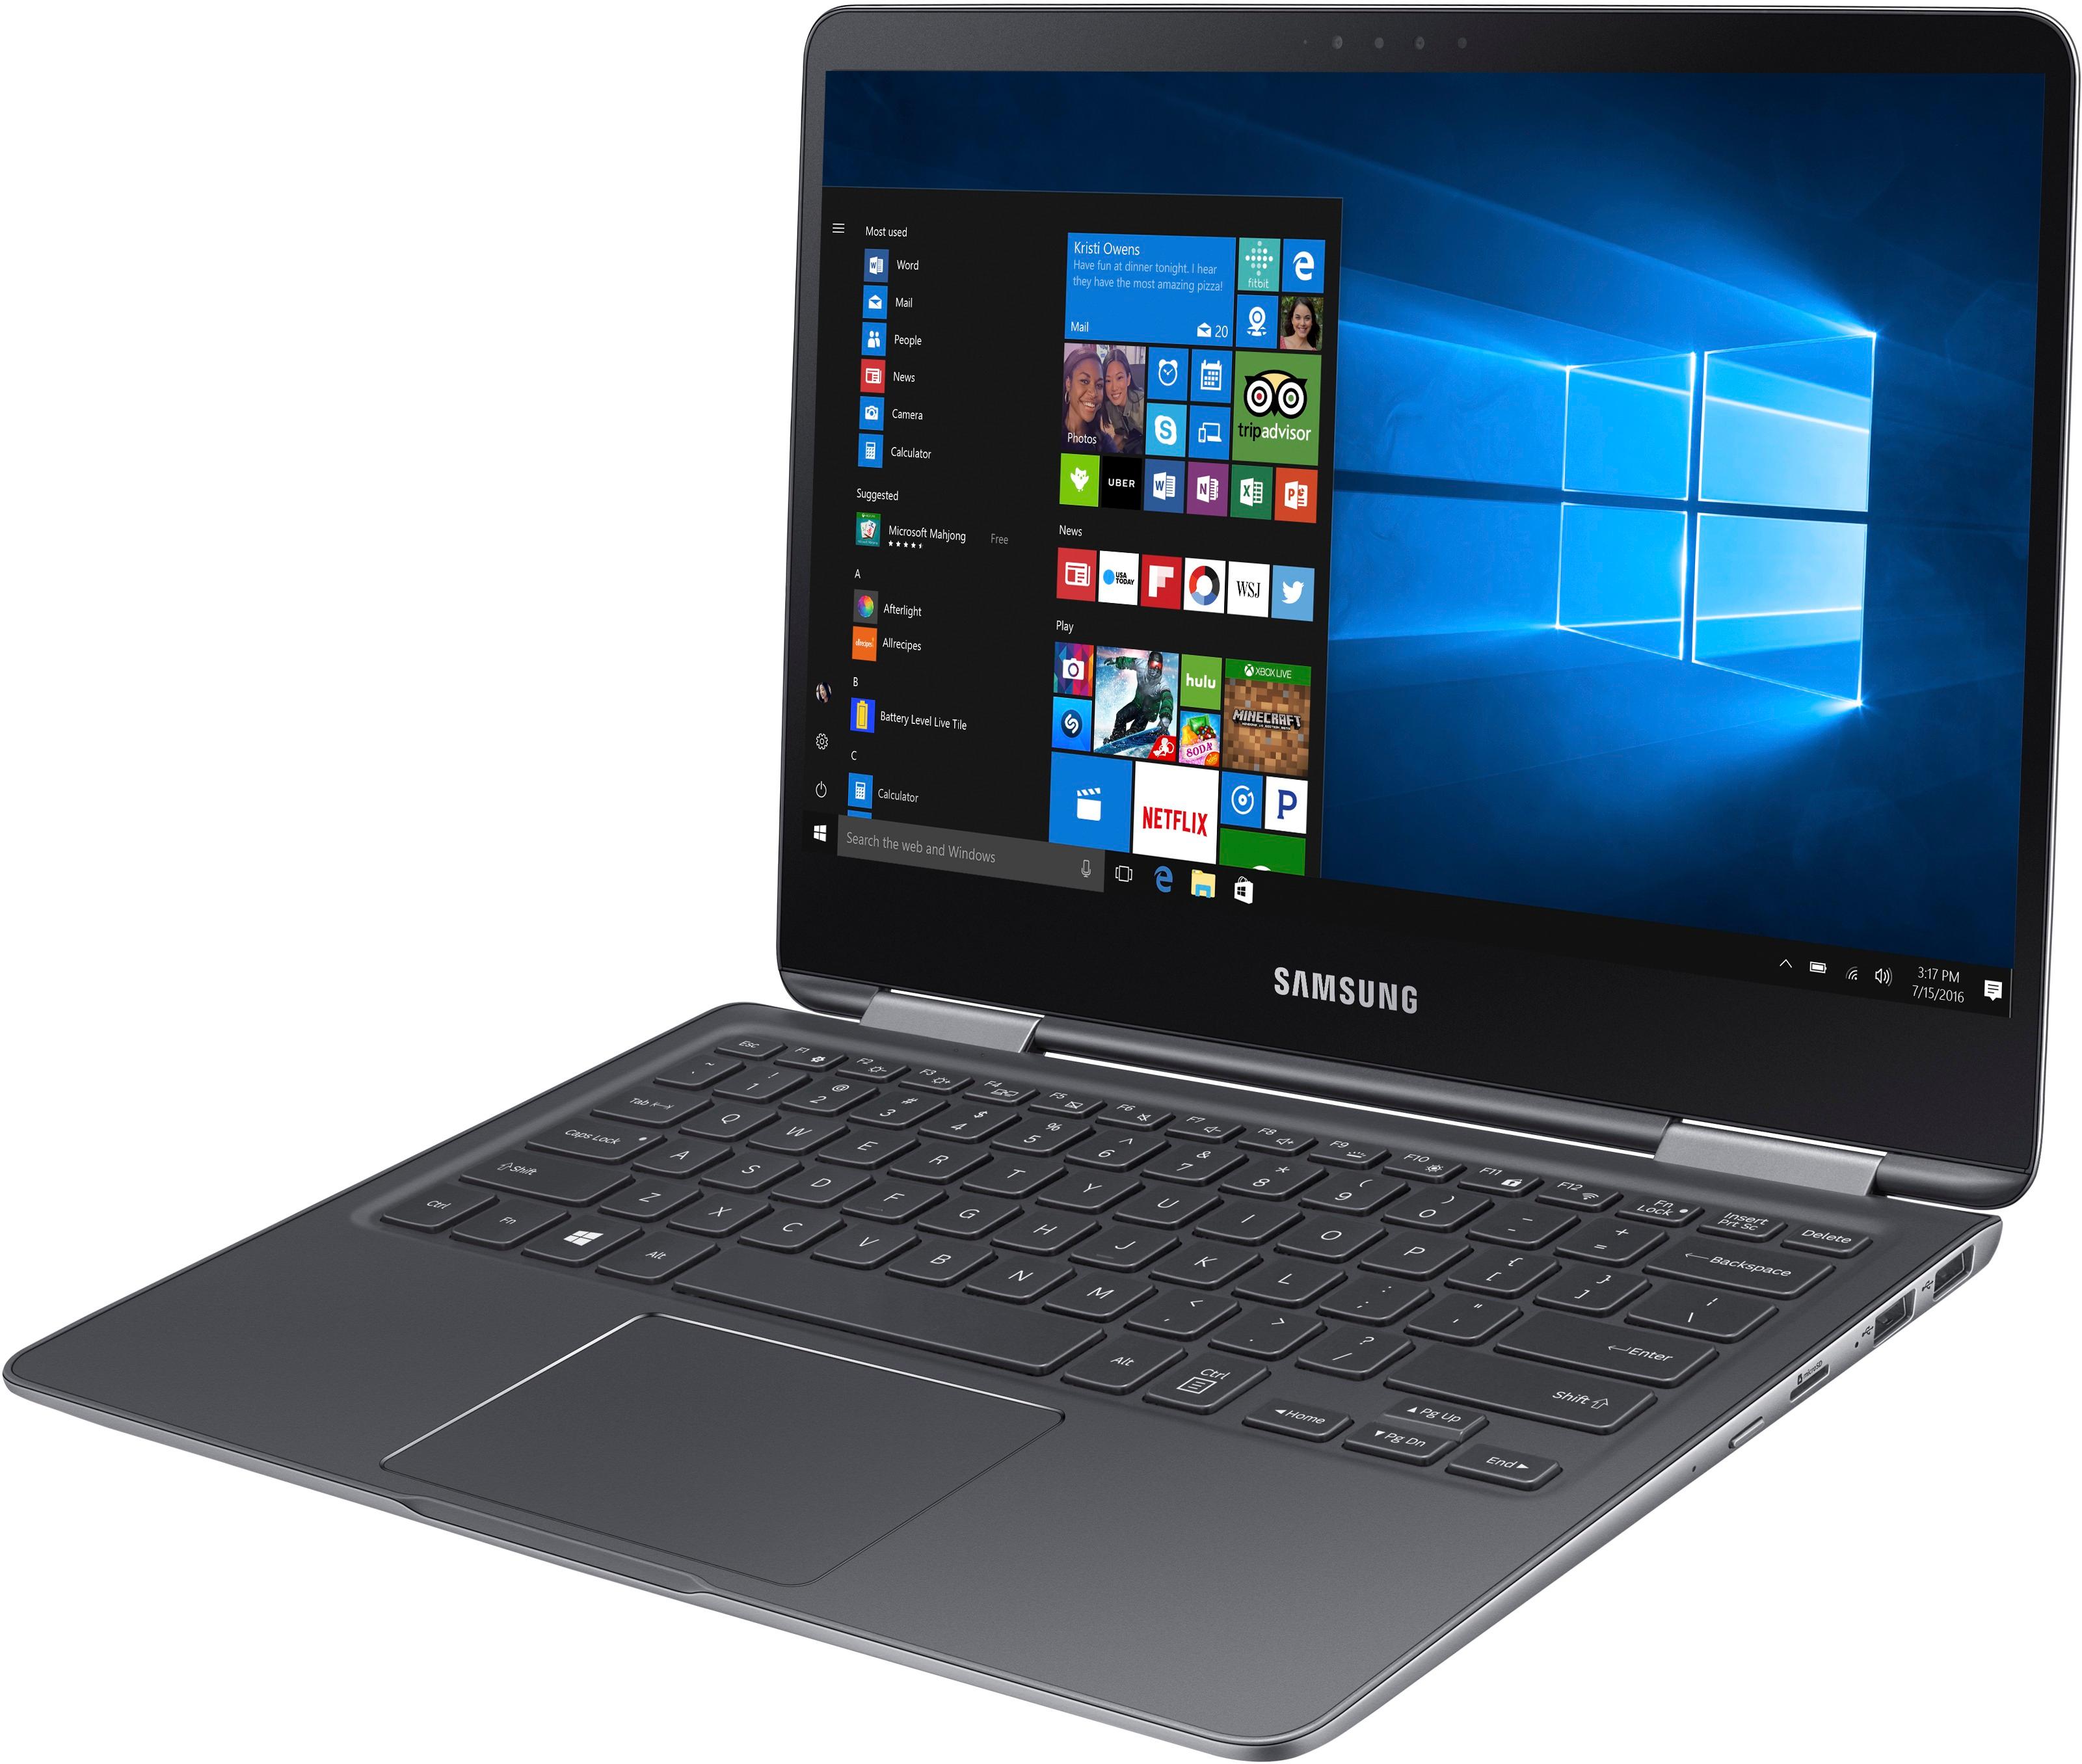 Questions and Answers: Samsung Notebook 9 Pro 13.3